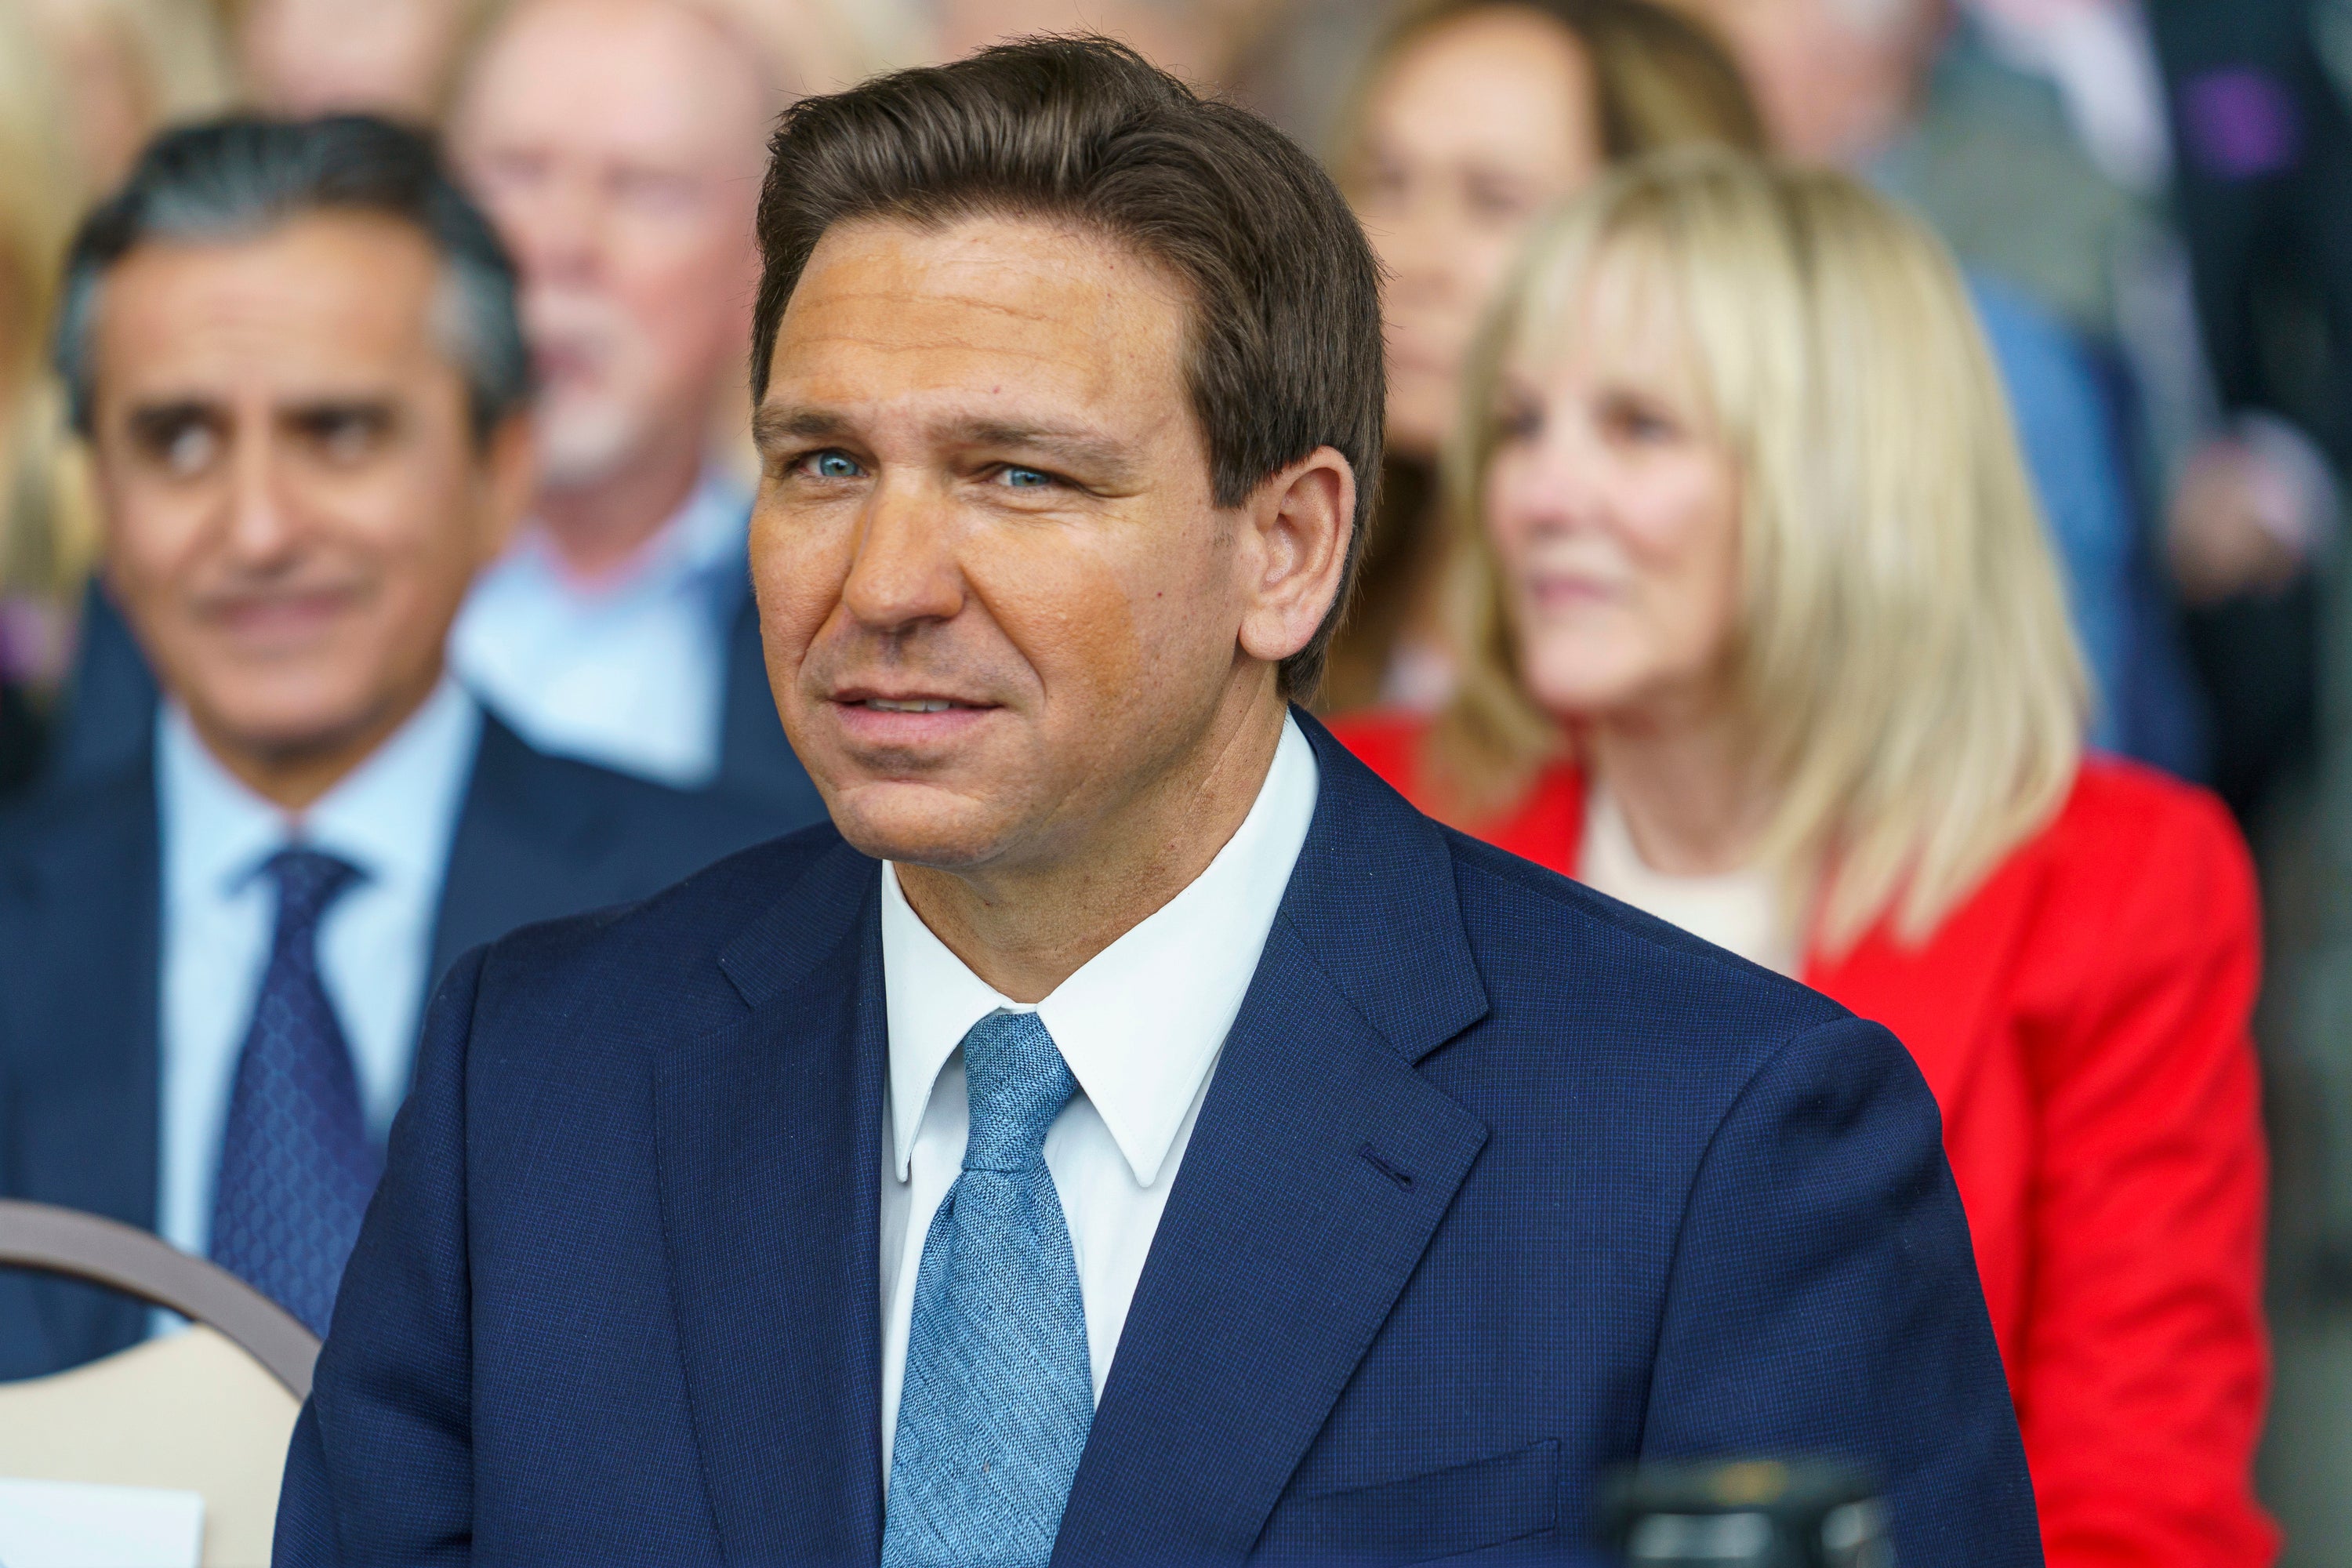 Ron DeSantis during a spring 2023 visit to the Reagan Presidential Library in Southern California